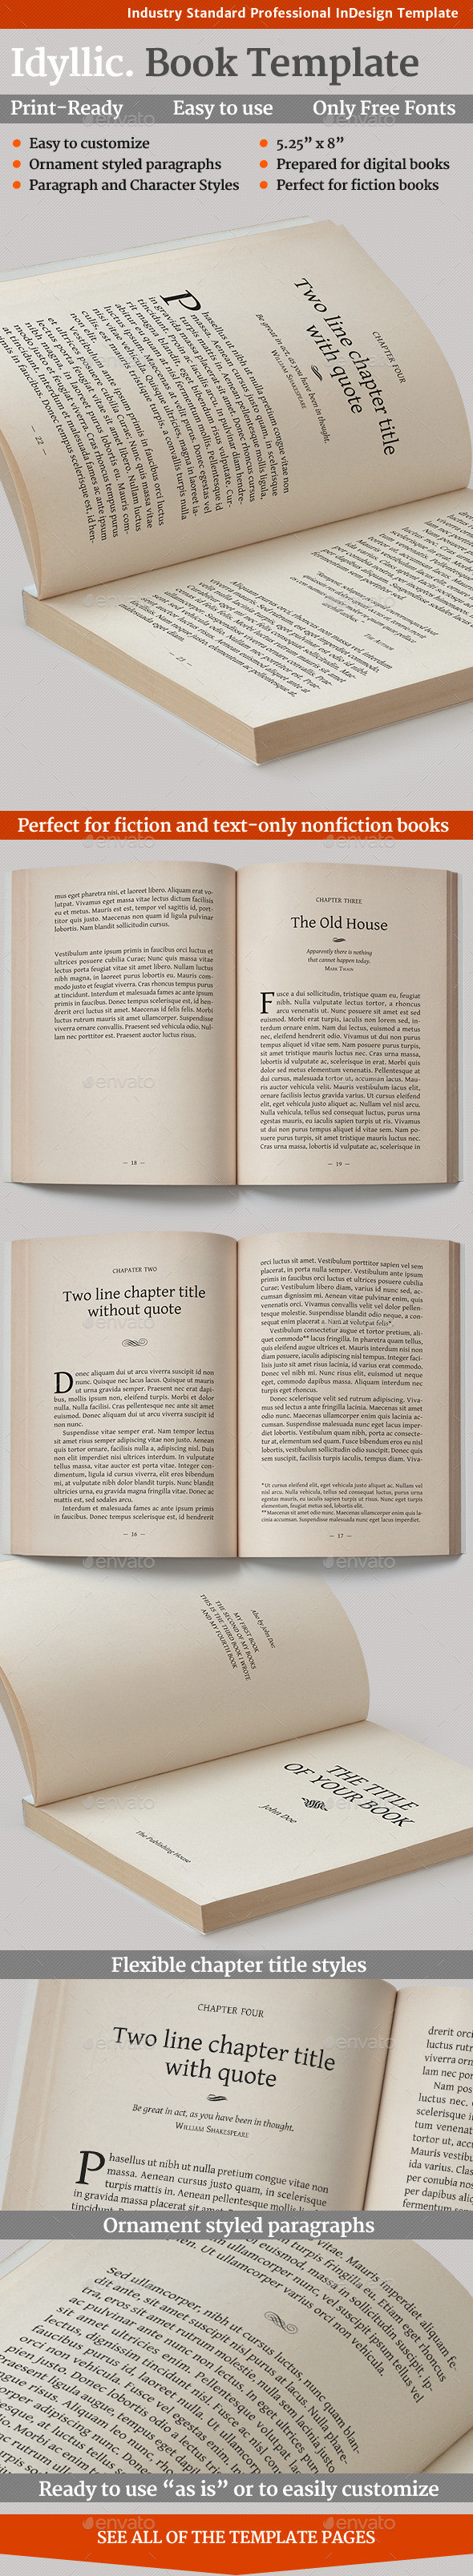 Preview idyllic book template